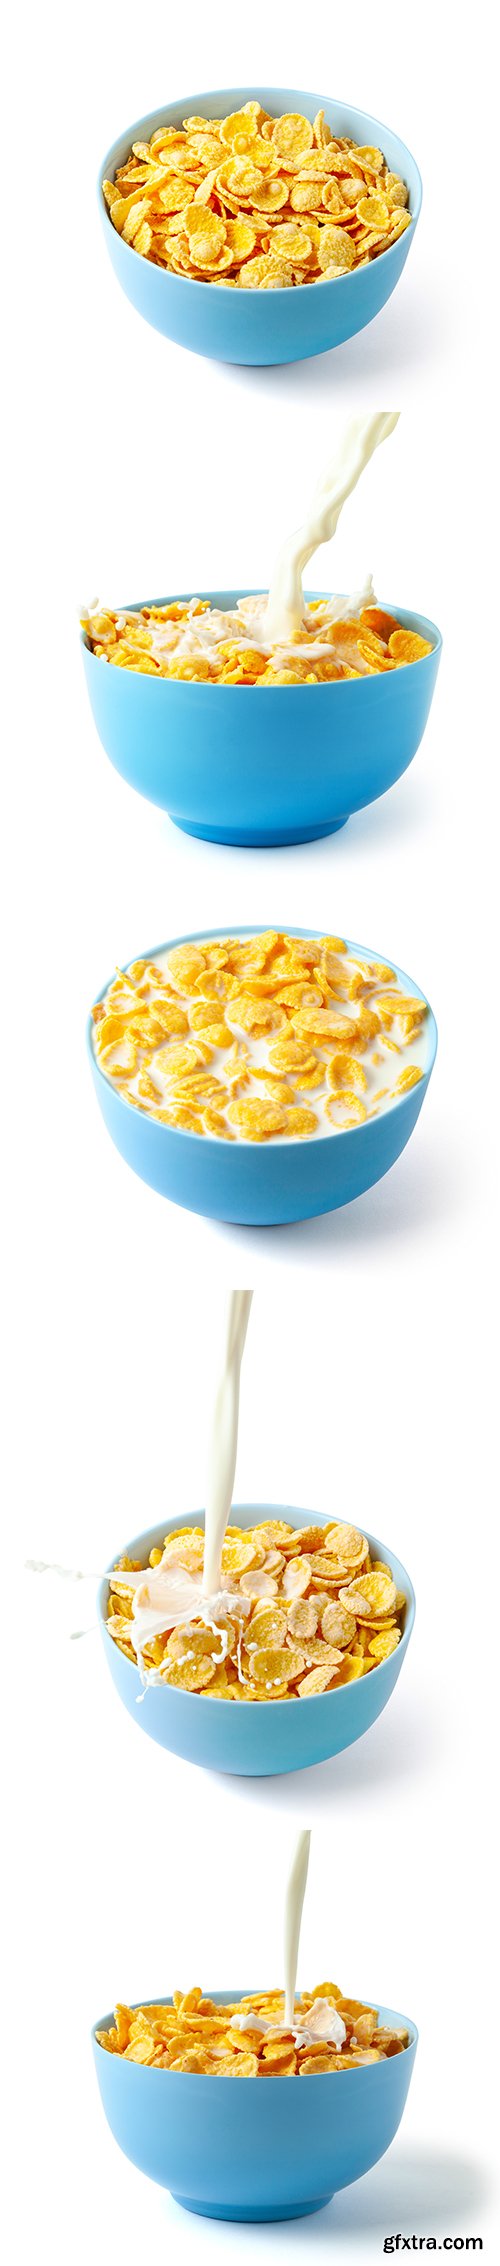 Cornflakes Isolated - 10xJPGs